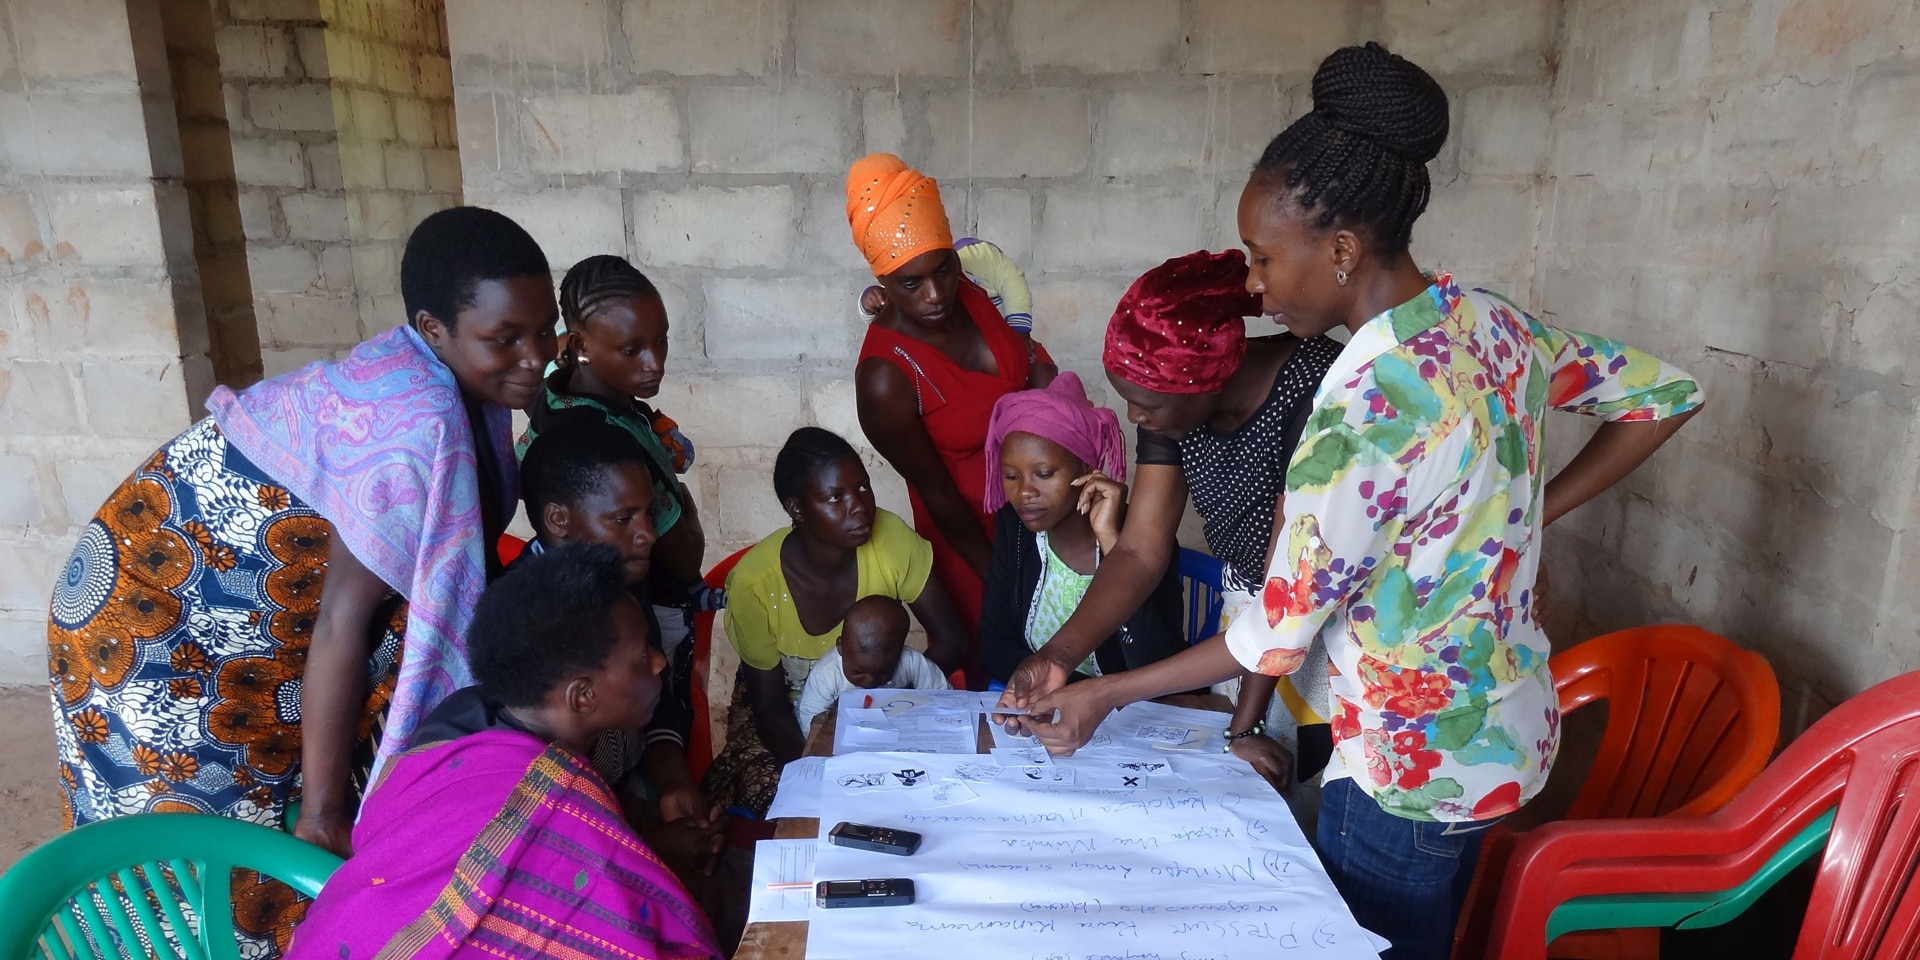 A group of women work at a table in Tanzania. Papers are laid out on it.